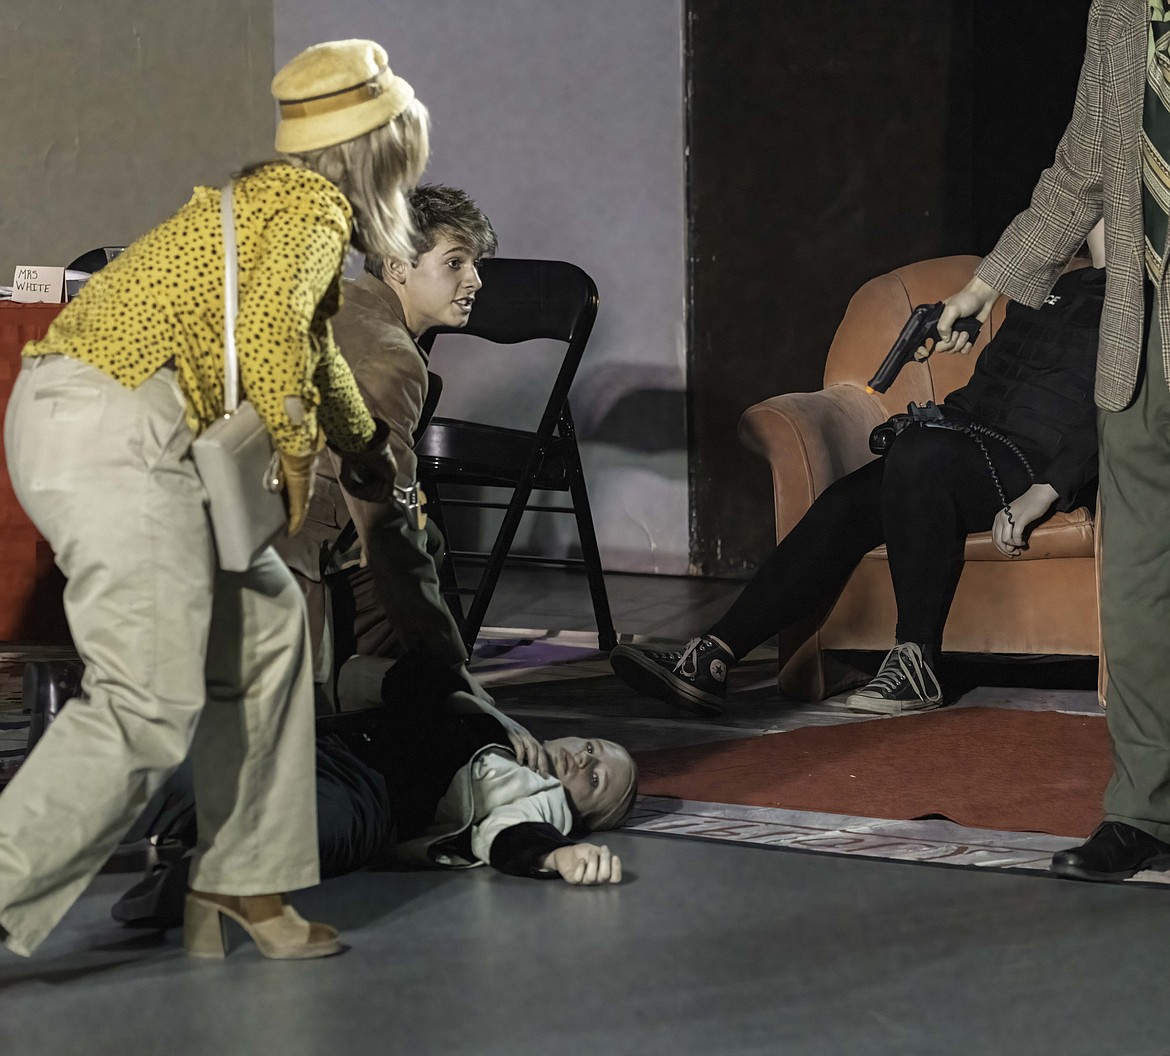 Cecilia Harris as Colonel Mustard discovering another body. (Tracy Scott/Valley Press)